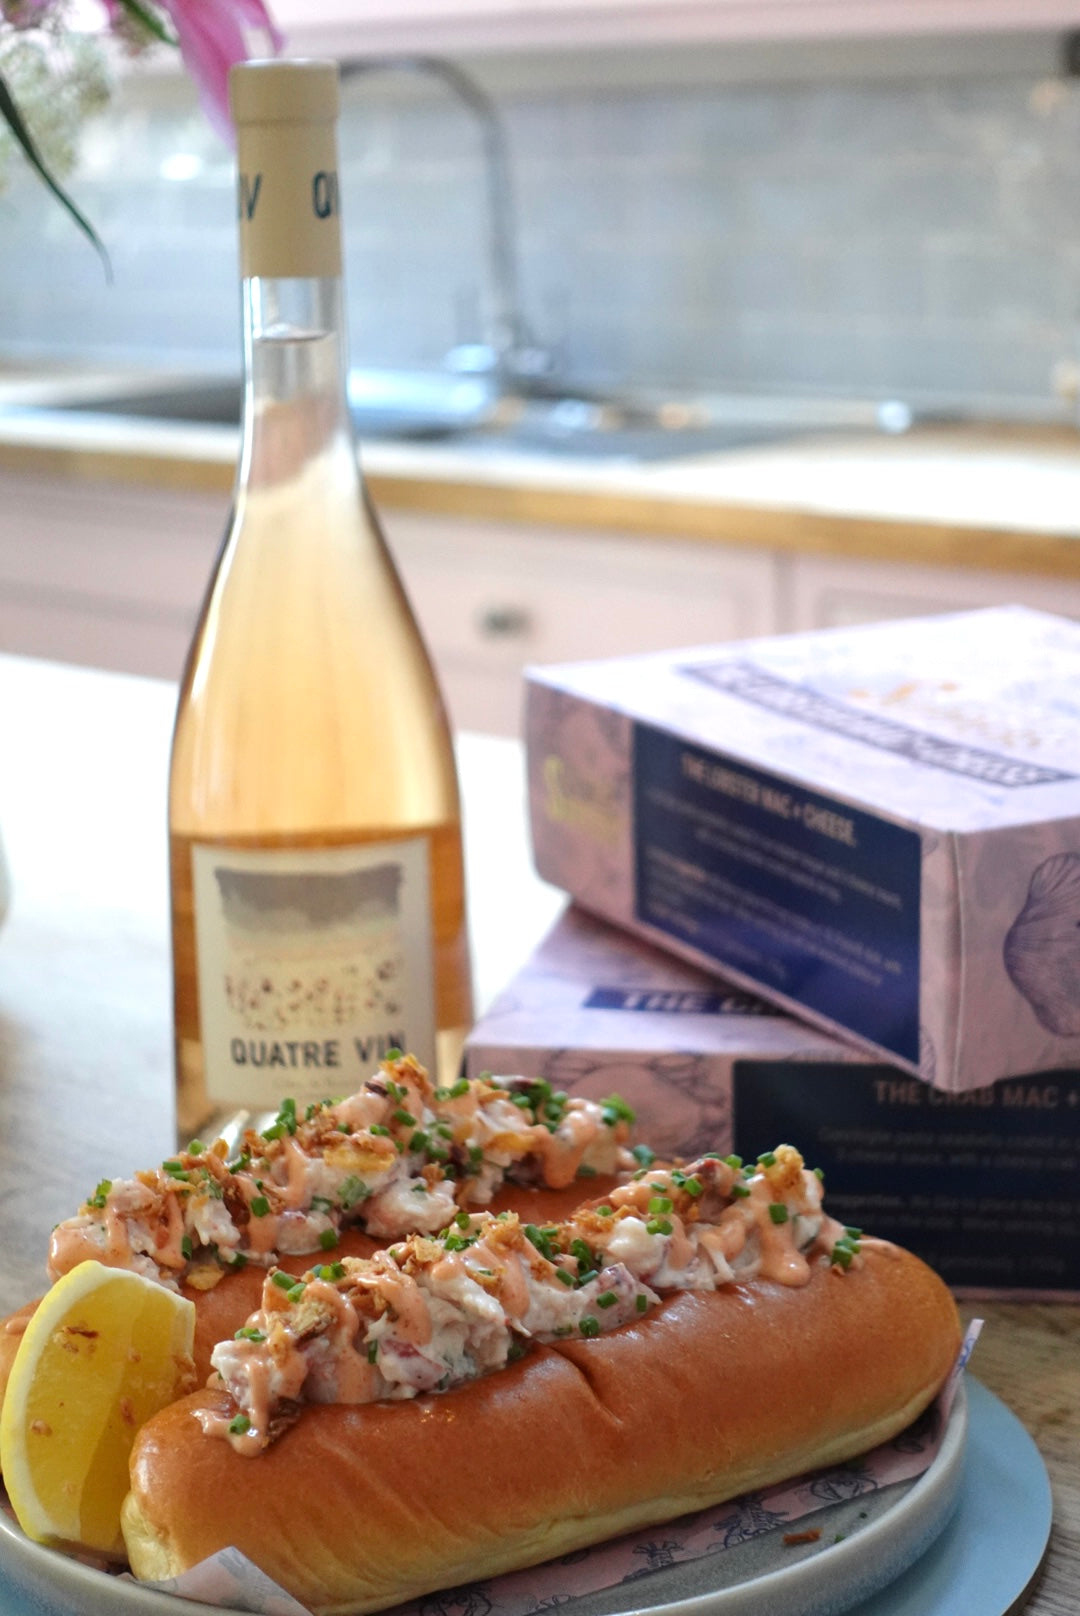 THE LOBSTER ROLL SUPPER BOX.